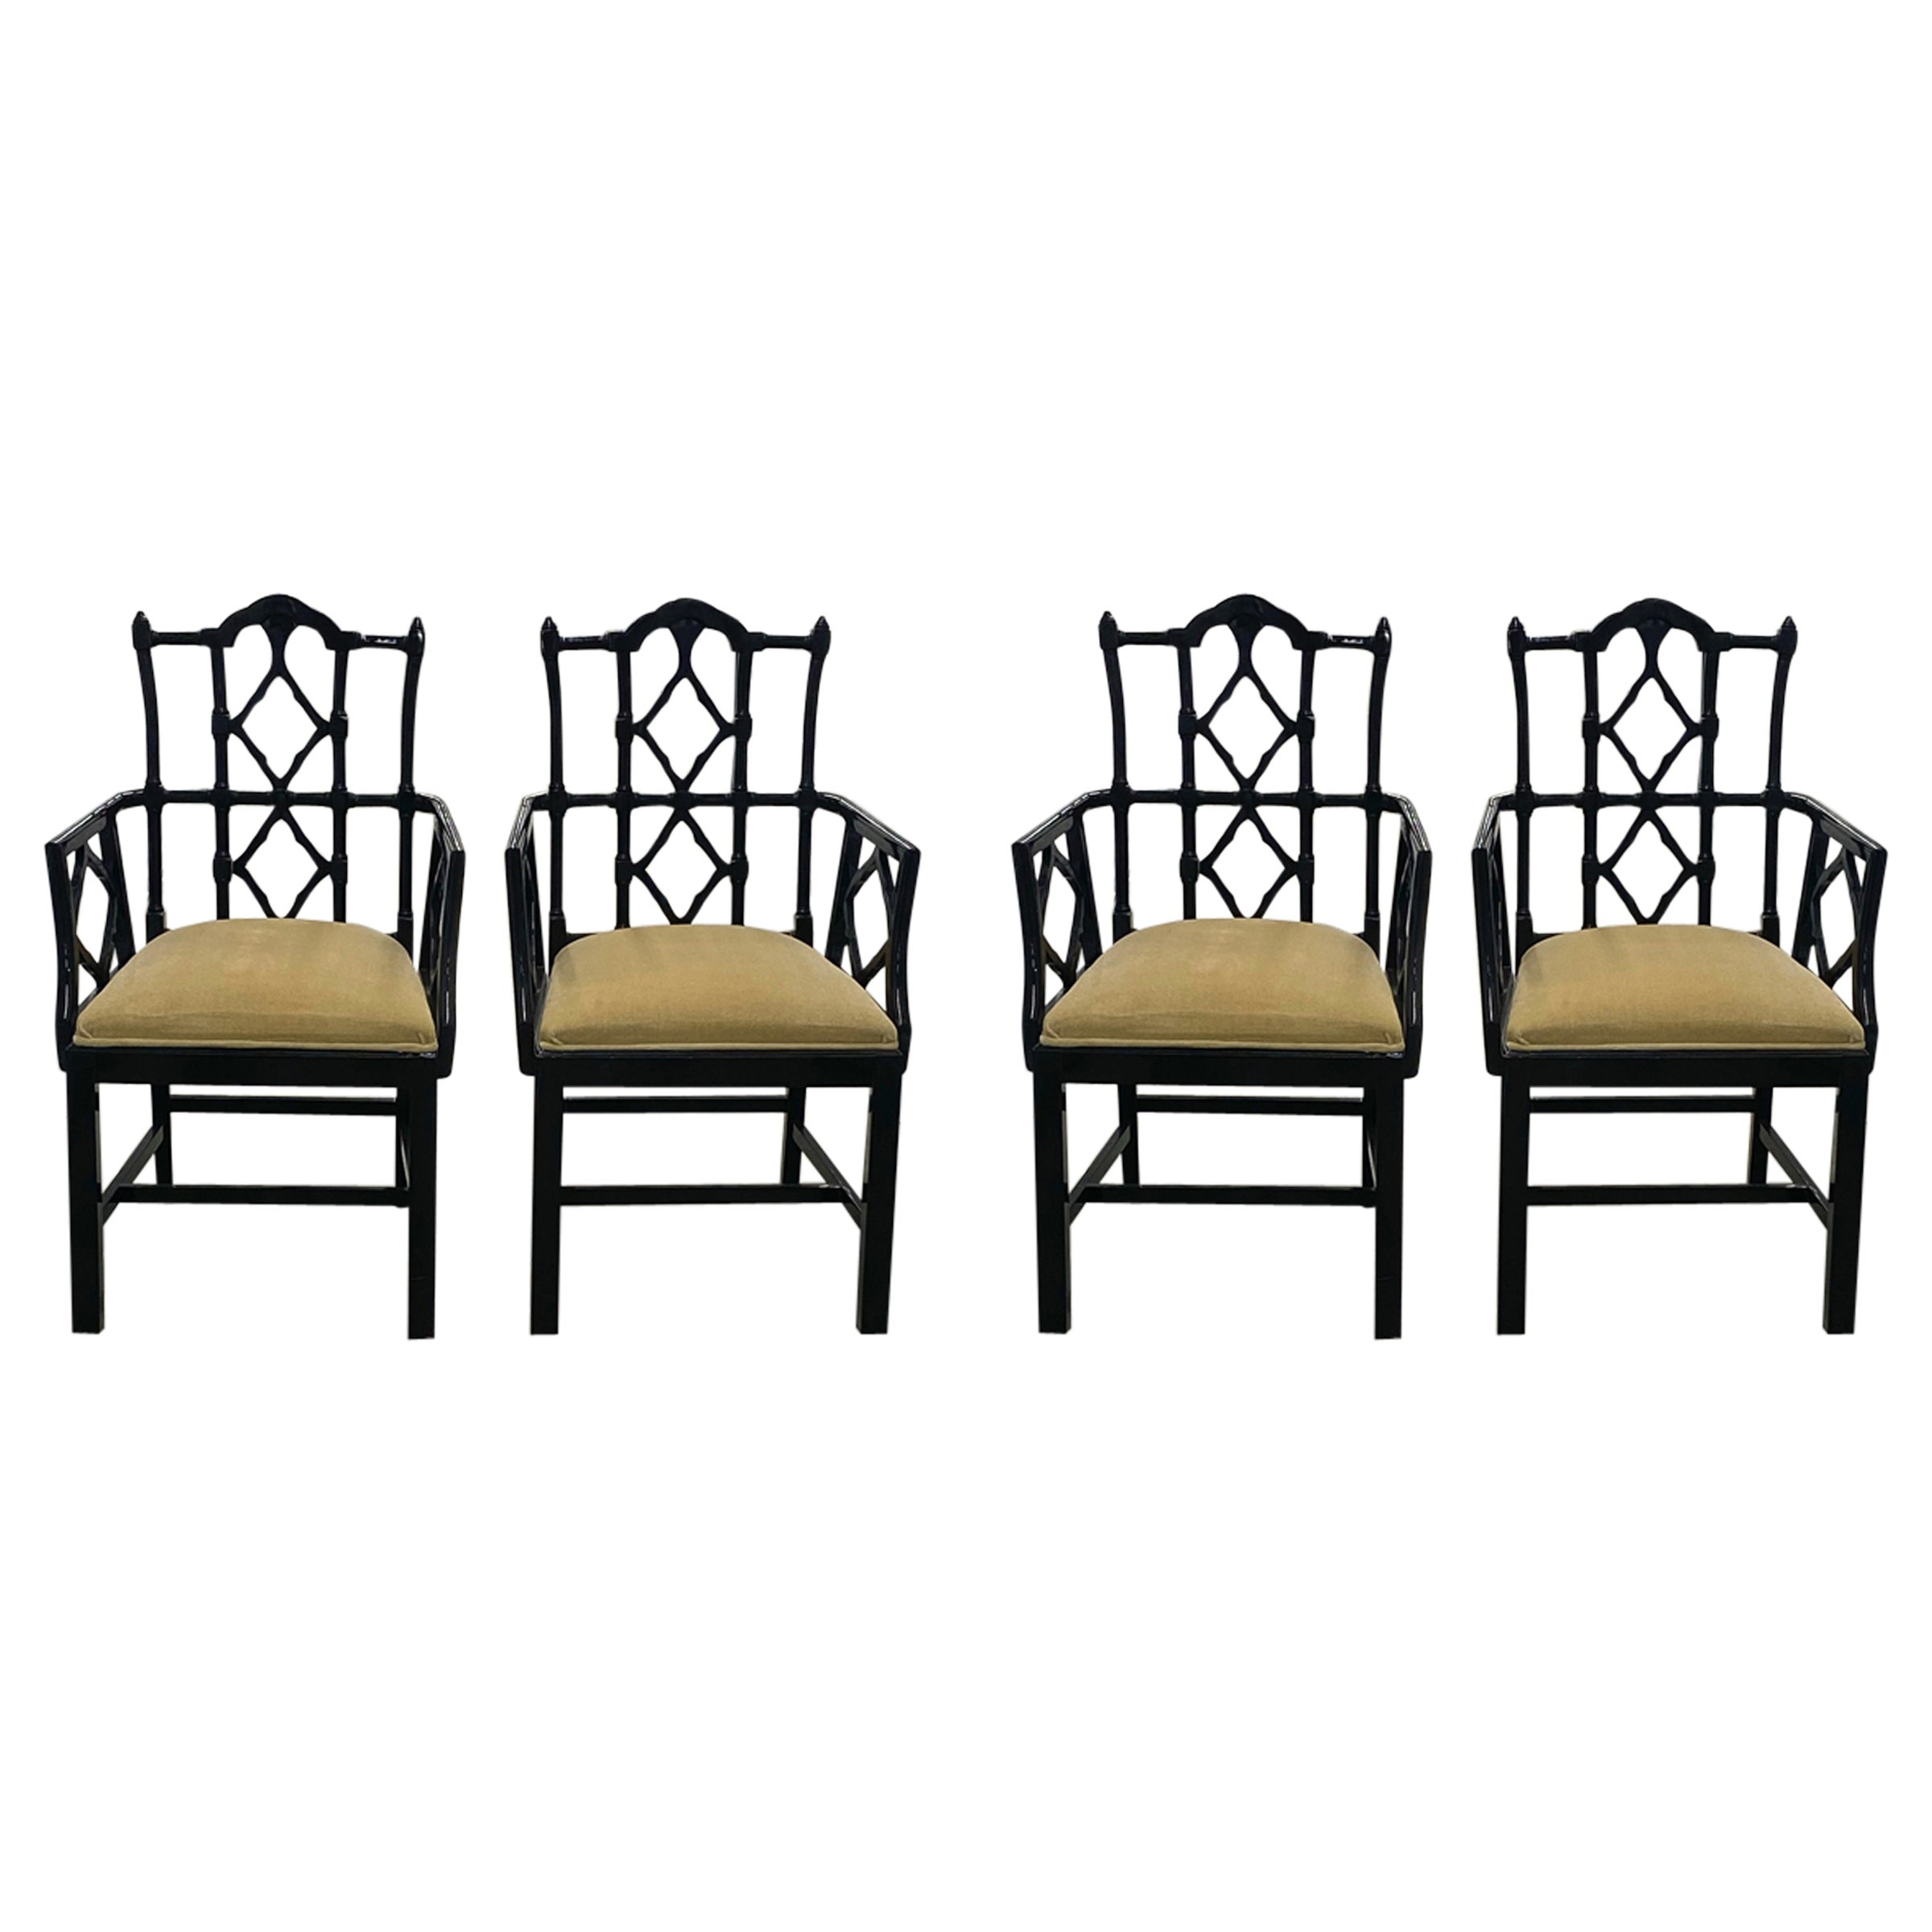 Chinese Chippendale Fretwork Dining Arm Chairs, Set of 4